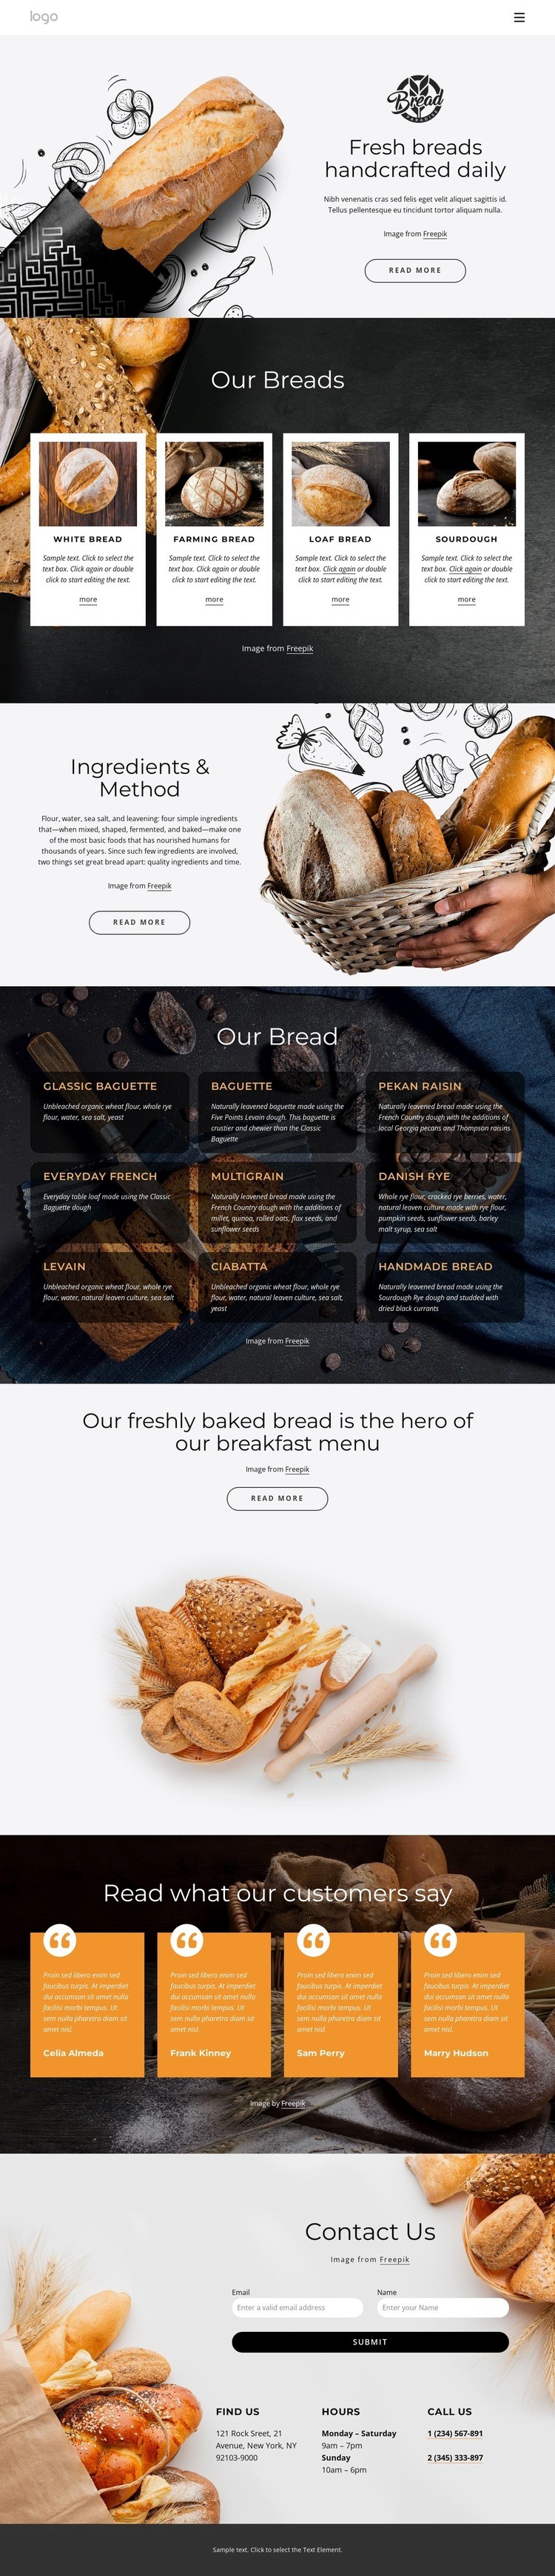 Fresh bread handcrafted every day Web Page Design